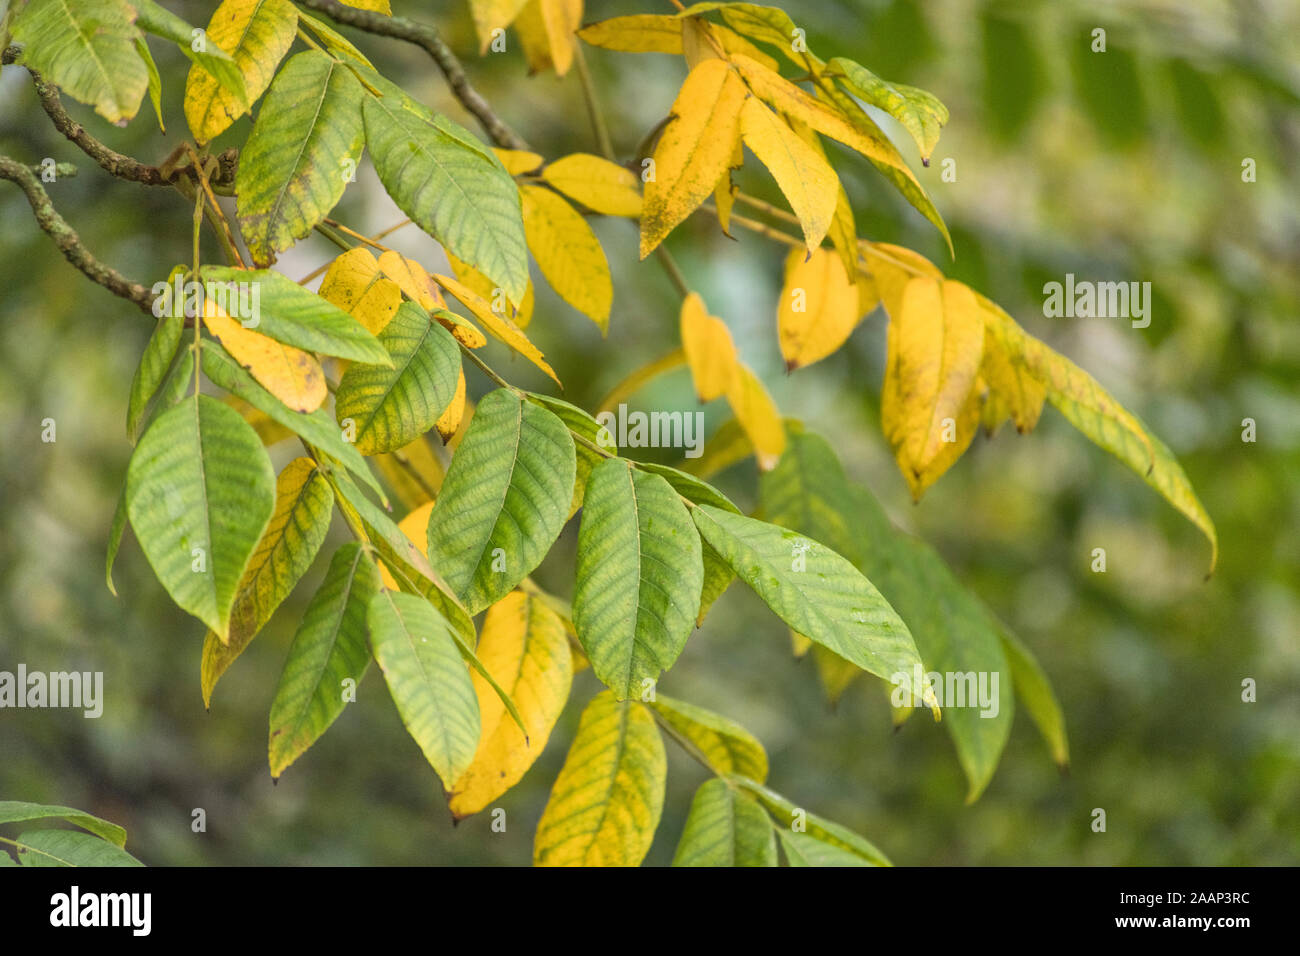 Autumnal yellowing leaves and foliage of Japanese Walnut - Juglans ailantifolia. Parts used in medicinal remedies, herbal remedies. SEE NOTES Stock Photo